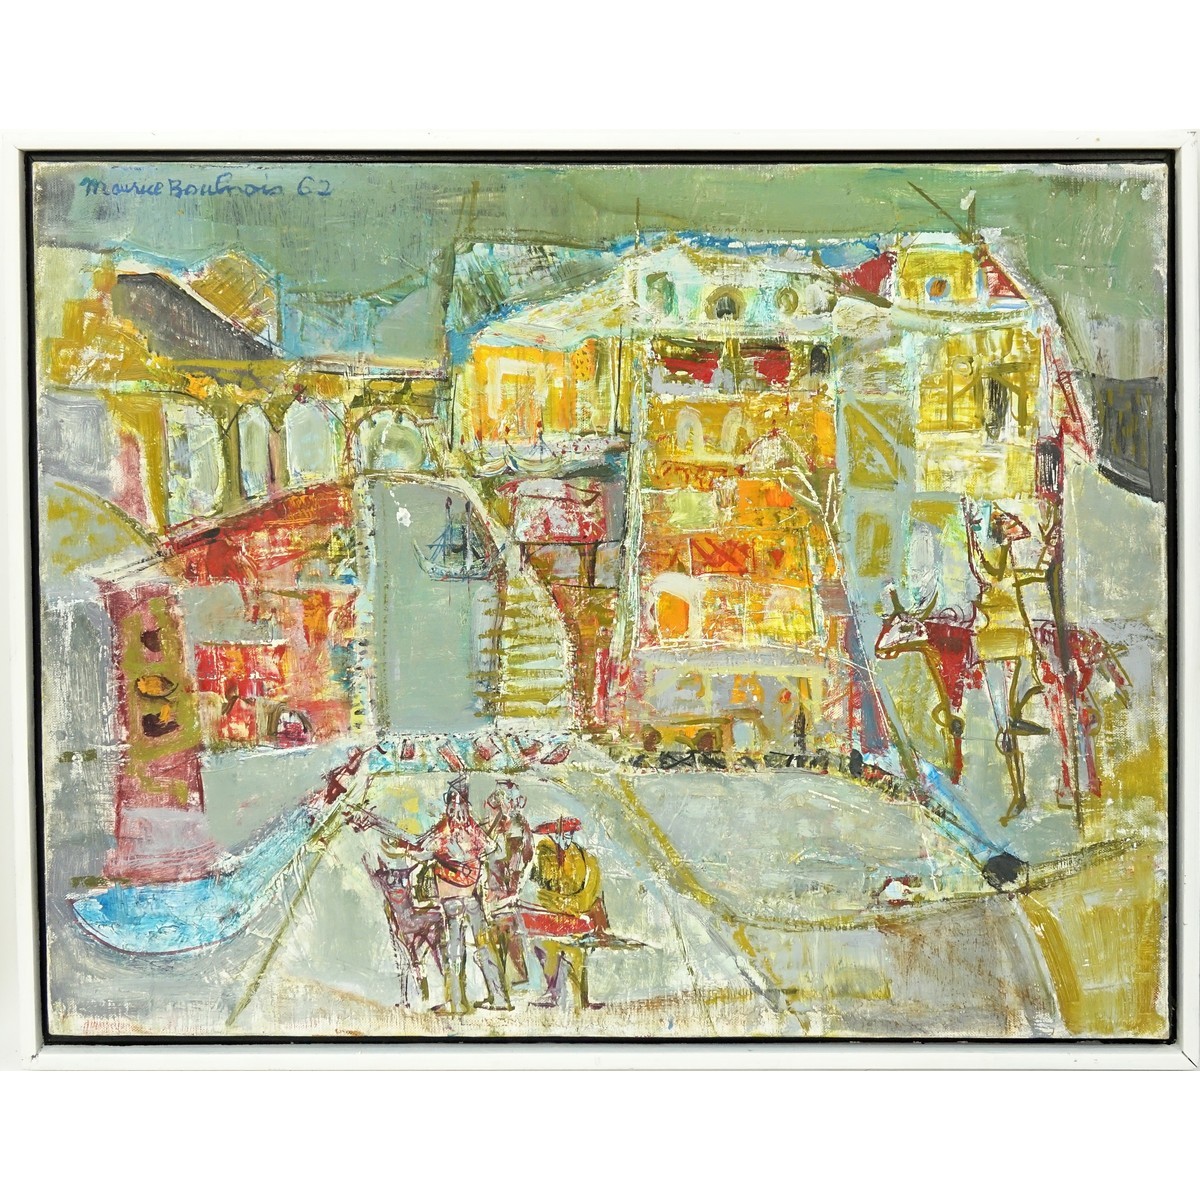 Maurice Boulnois, France (1918-2011) Oil on Canvas, Abstract Street Scene, Signed and Dated 1962 To